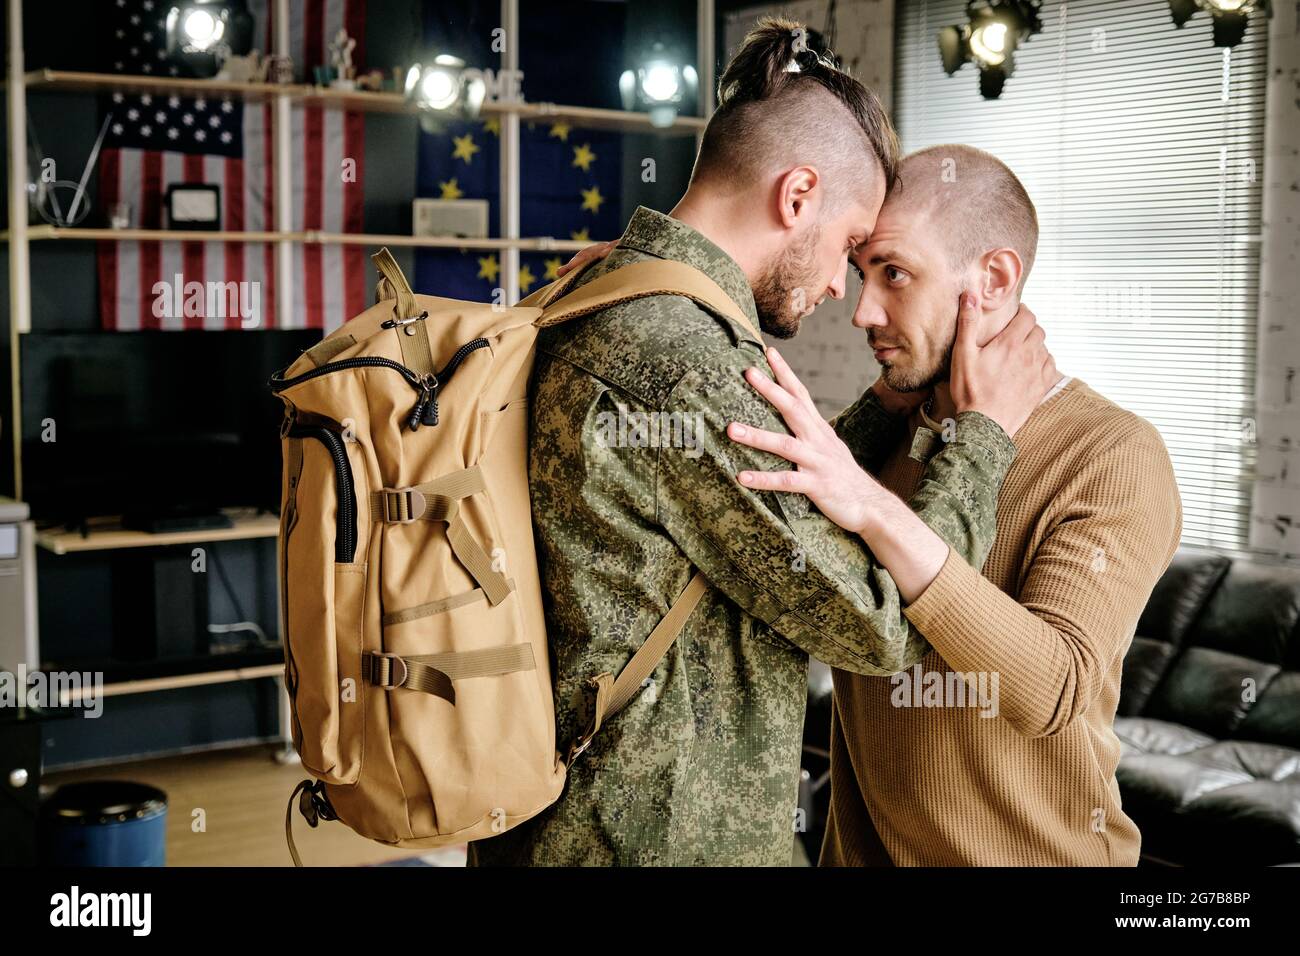 Military man in uniform hugging his boyfriend and promising to come back after military exercises Stock Photo